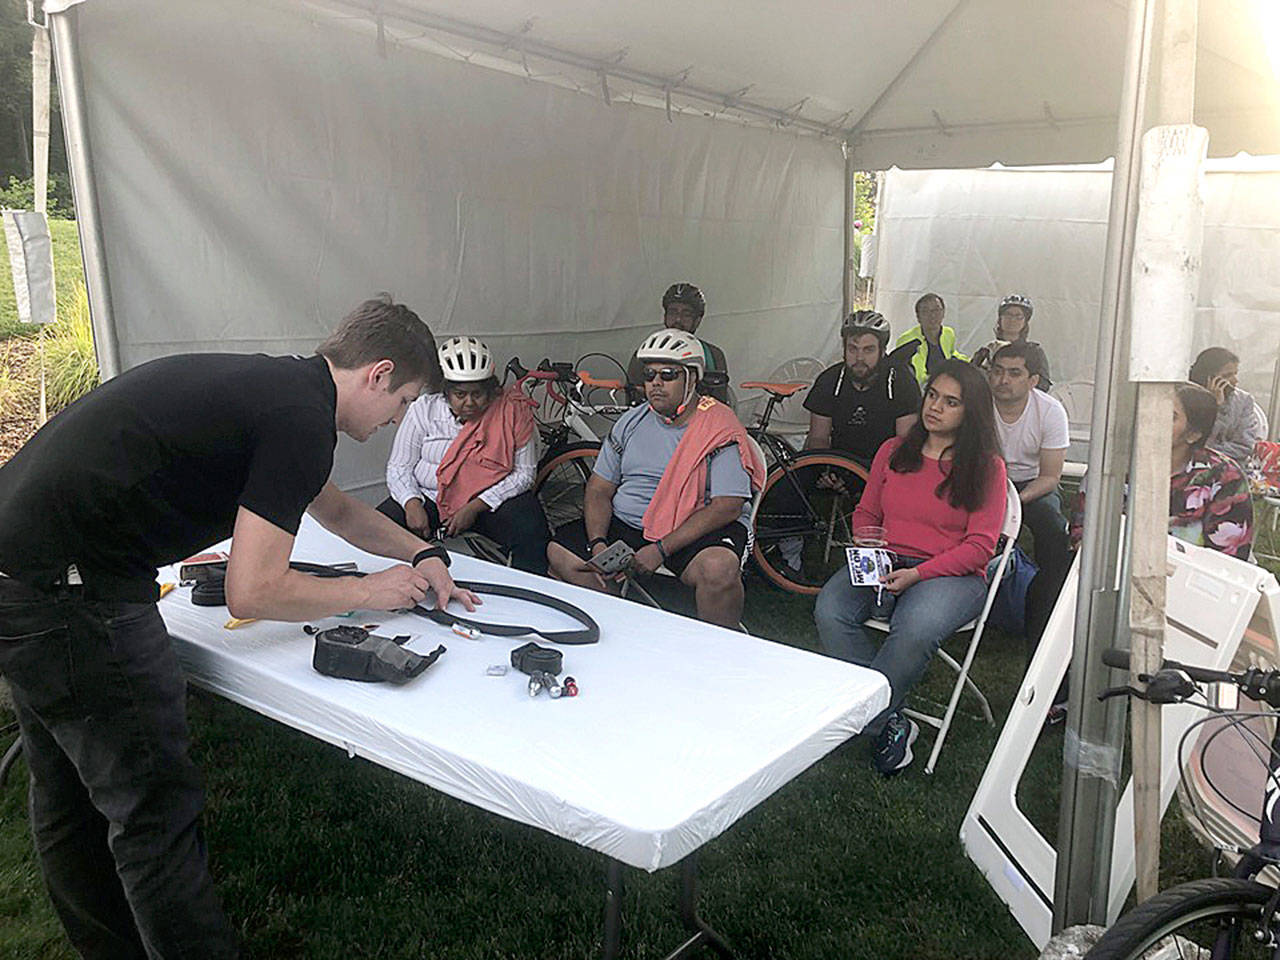 New riders and experienced bike commuters learning from local bike shops at the skills clinics during Bike Bash on May 17. Courtesy photo of Go Redmond Facebook.